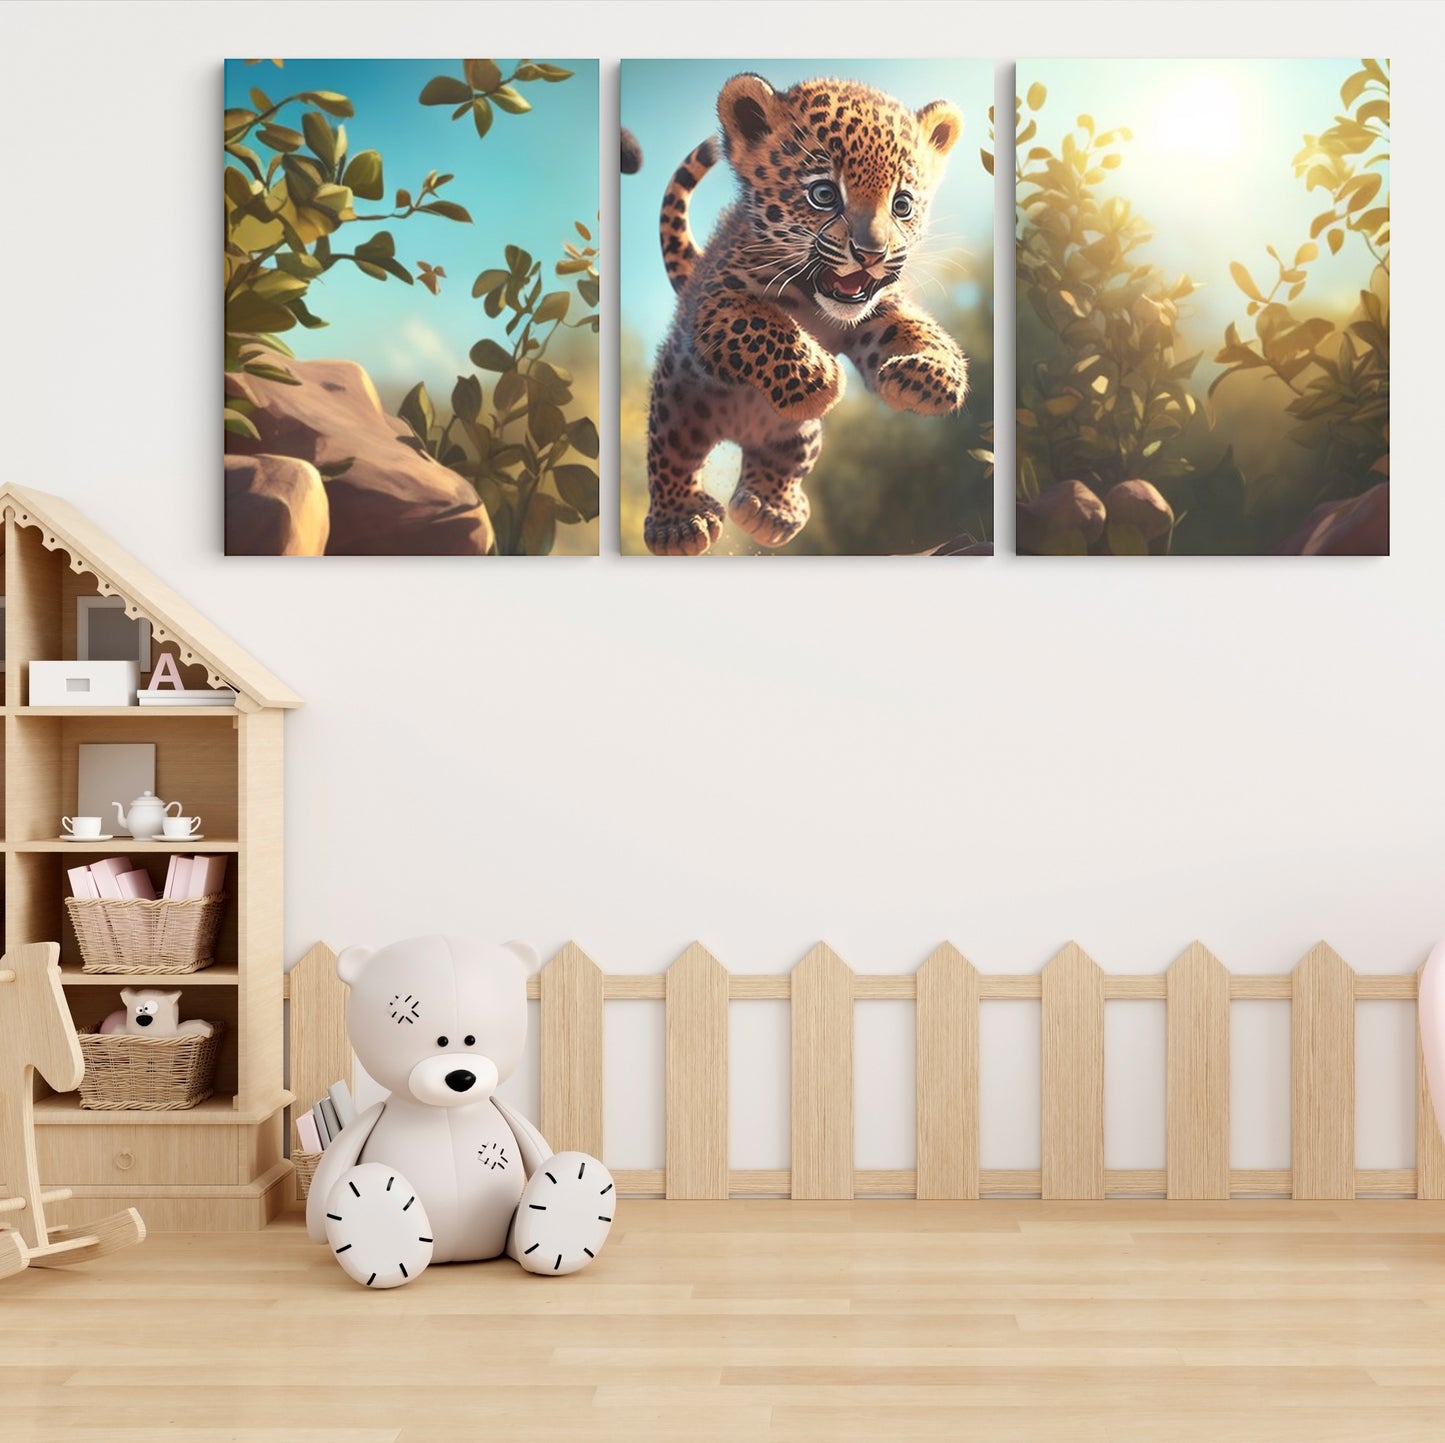 Whimsical Leap: A Wall Art Capturing the Playful Spirit of a Baby Leopard Jumping Over Stones in a Forest - Embrace the Joy of Nature's Marvels - S05E68